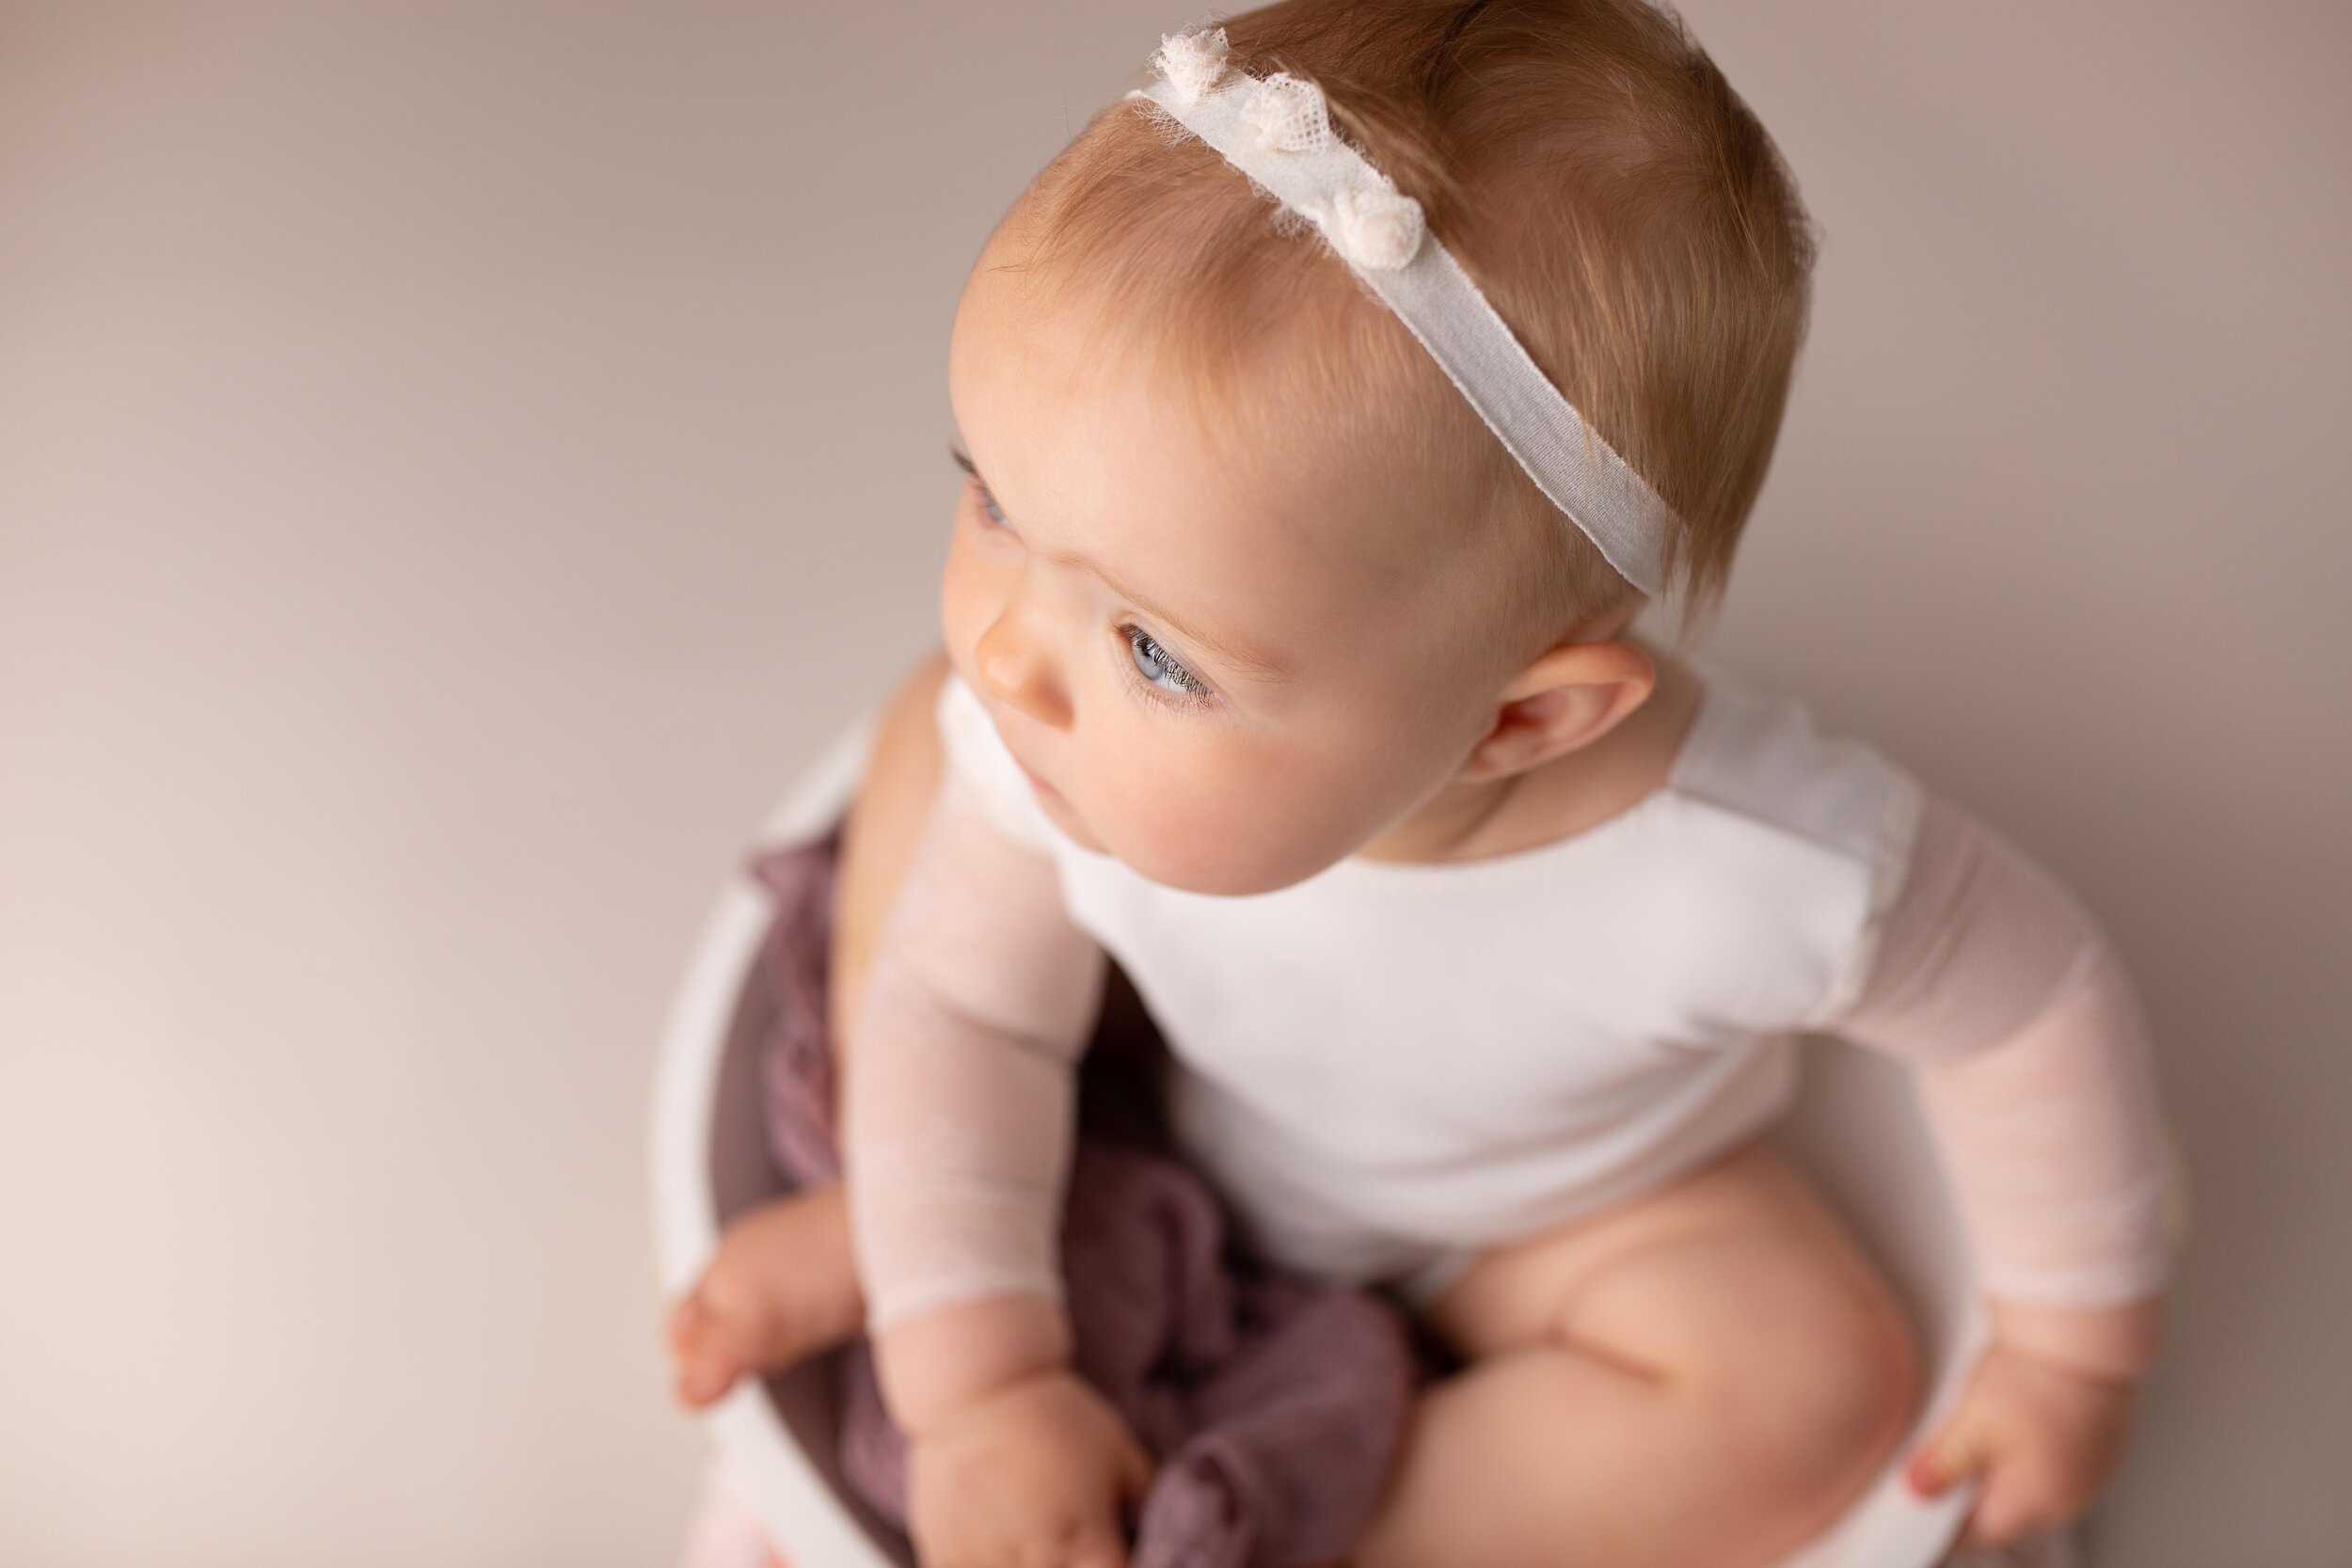 child-photography-sitter-session-milestone-6-months-old-lea-cooper-photography.jpg